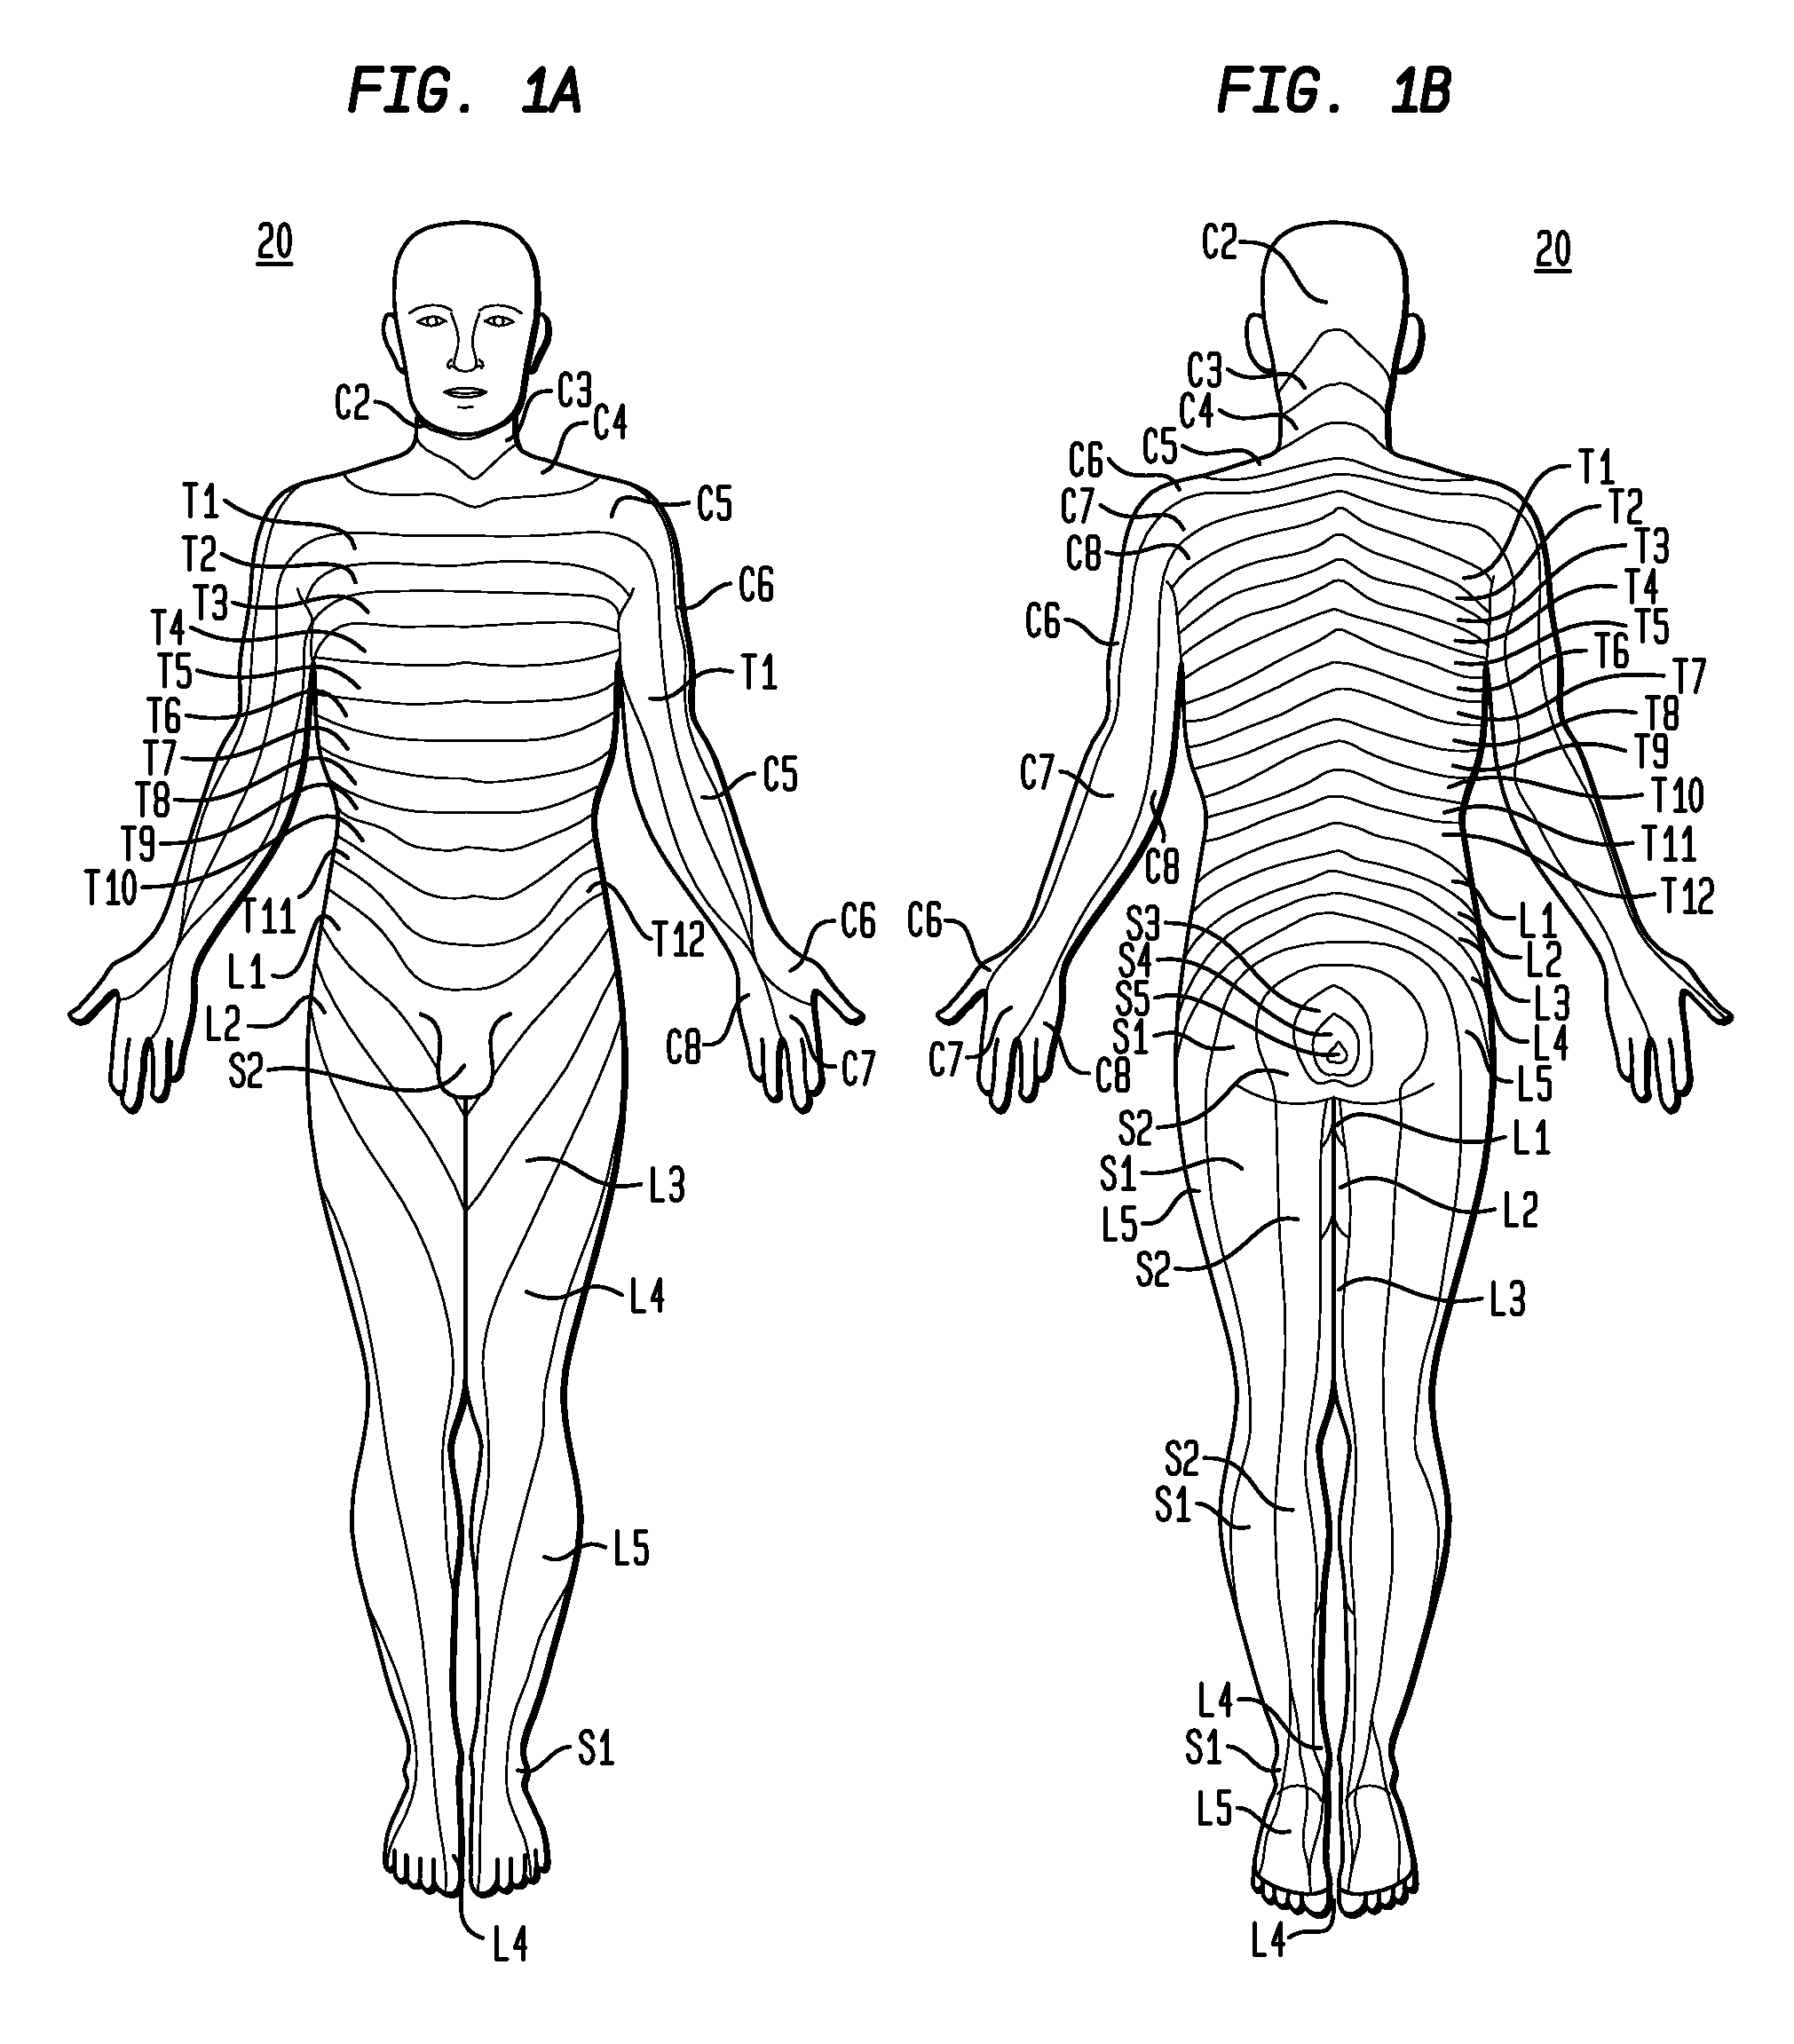 Dermatome stimulation devices and methods